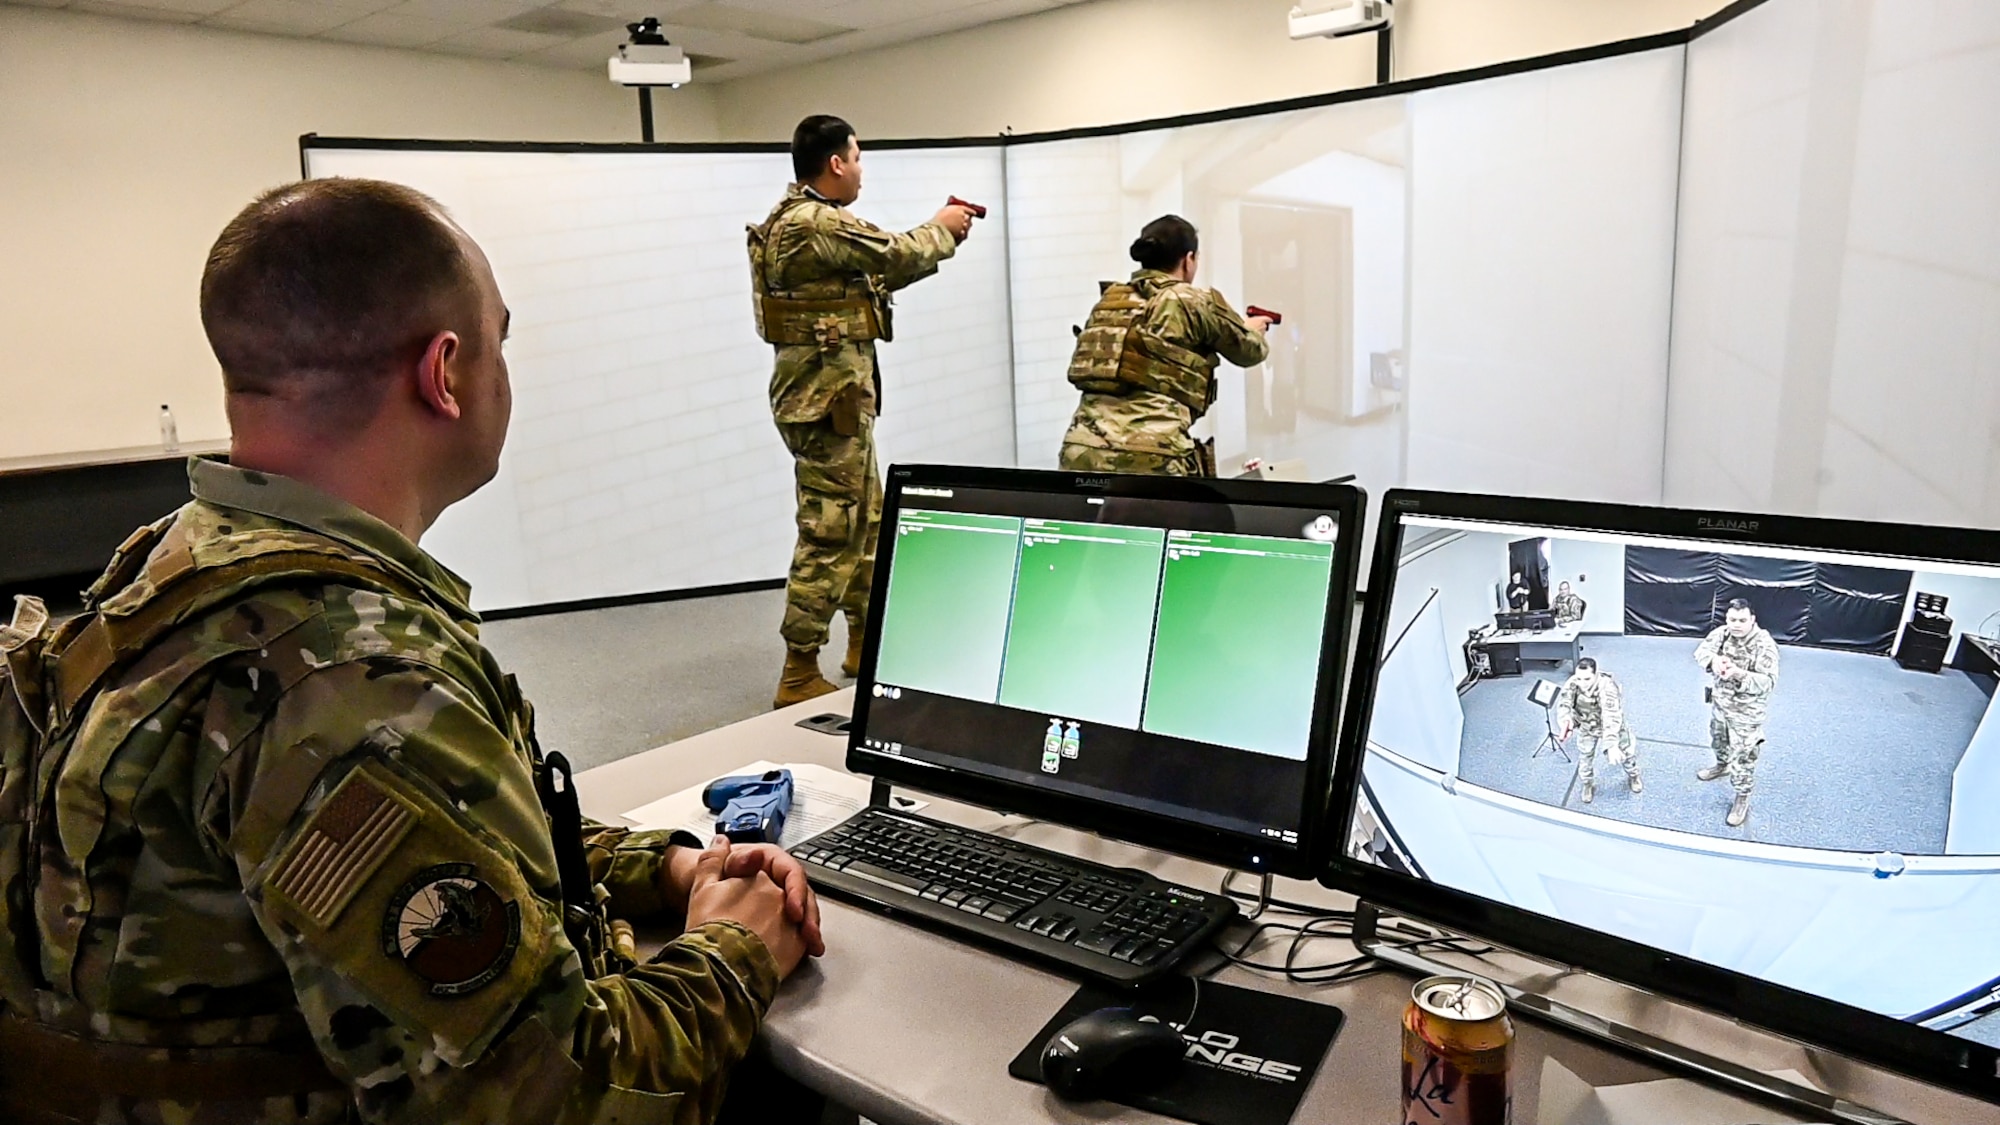 Staff Sgt. Charles Spellman, 412th Security Forces Squadron Standardization and Evaluations, monitors two Defenders as they go through a training scenario on the Multiple Interactive Learning Objectives (MILO) simulator at the Combat Arms Training and Maintenance (CATM) center on Edwards Air Force Base, California. (Air Force photo by Katherine Franco)